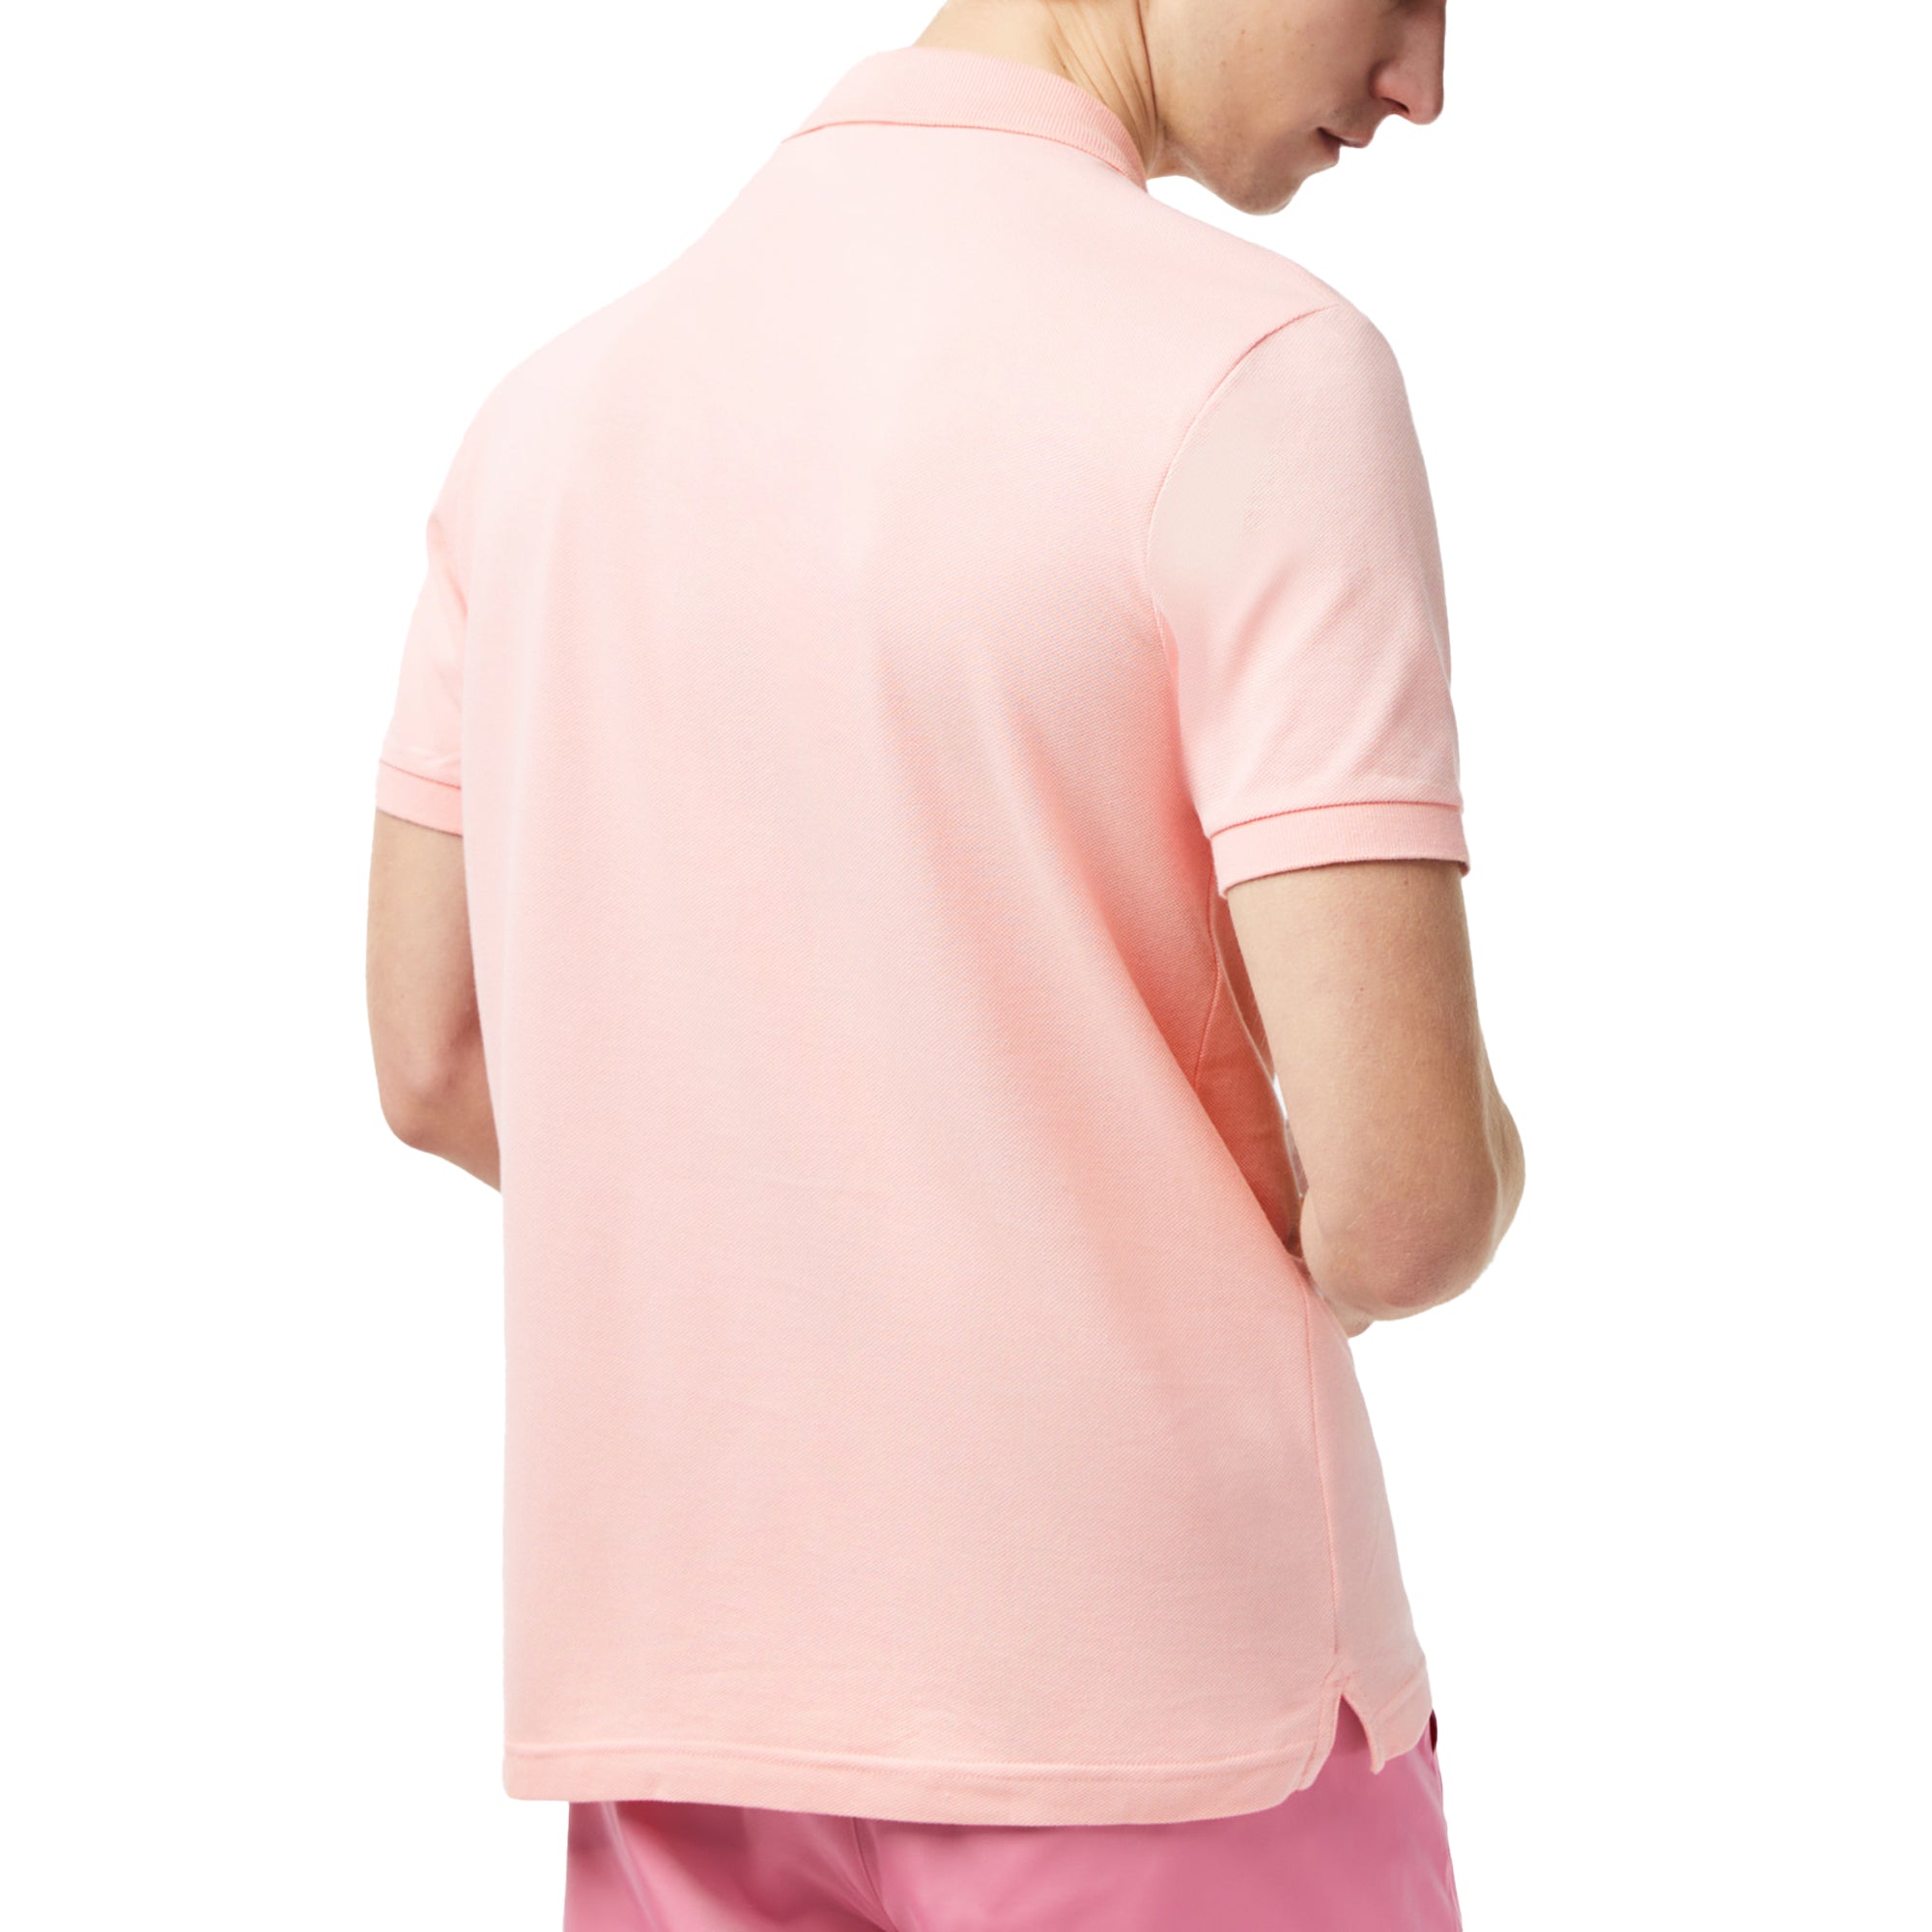 Lacoste Short Sleeved Slim Fit Polo PH4012 - Waterlily